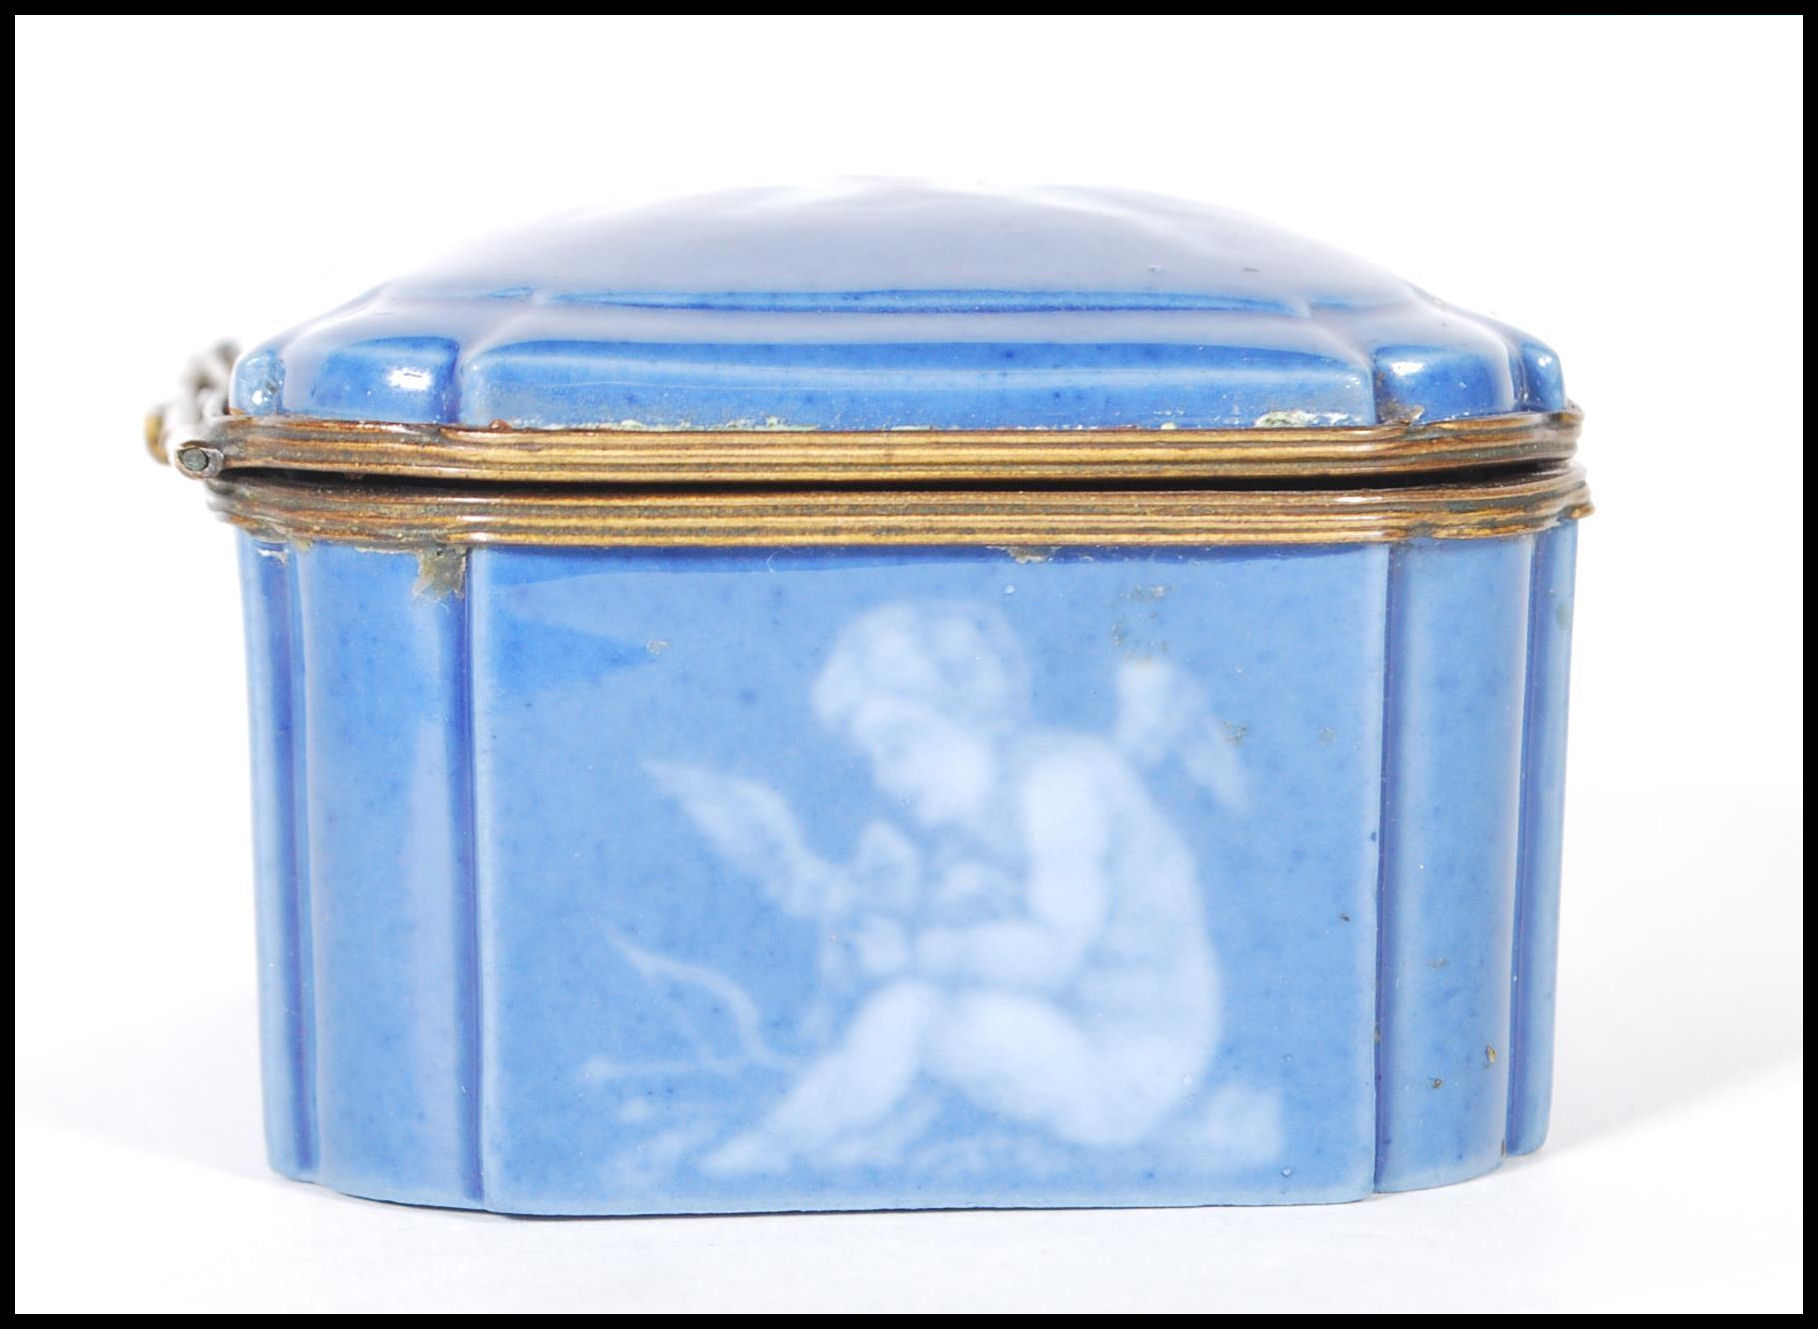 An early 20th Century continental German porcelain blue ceramic casket / trinket box with a pat - Image 4 of 9